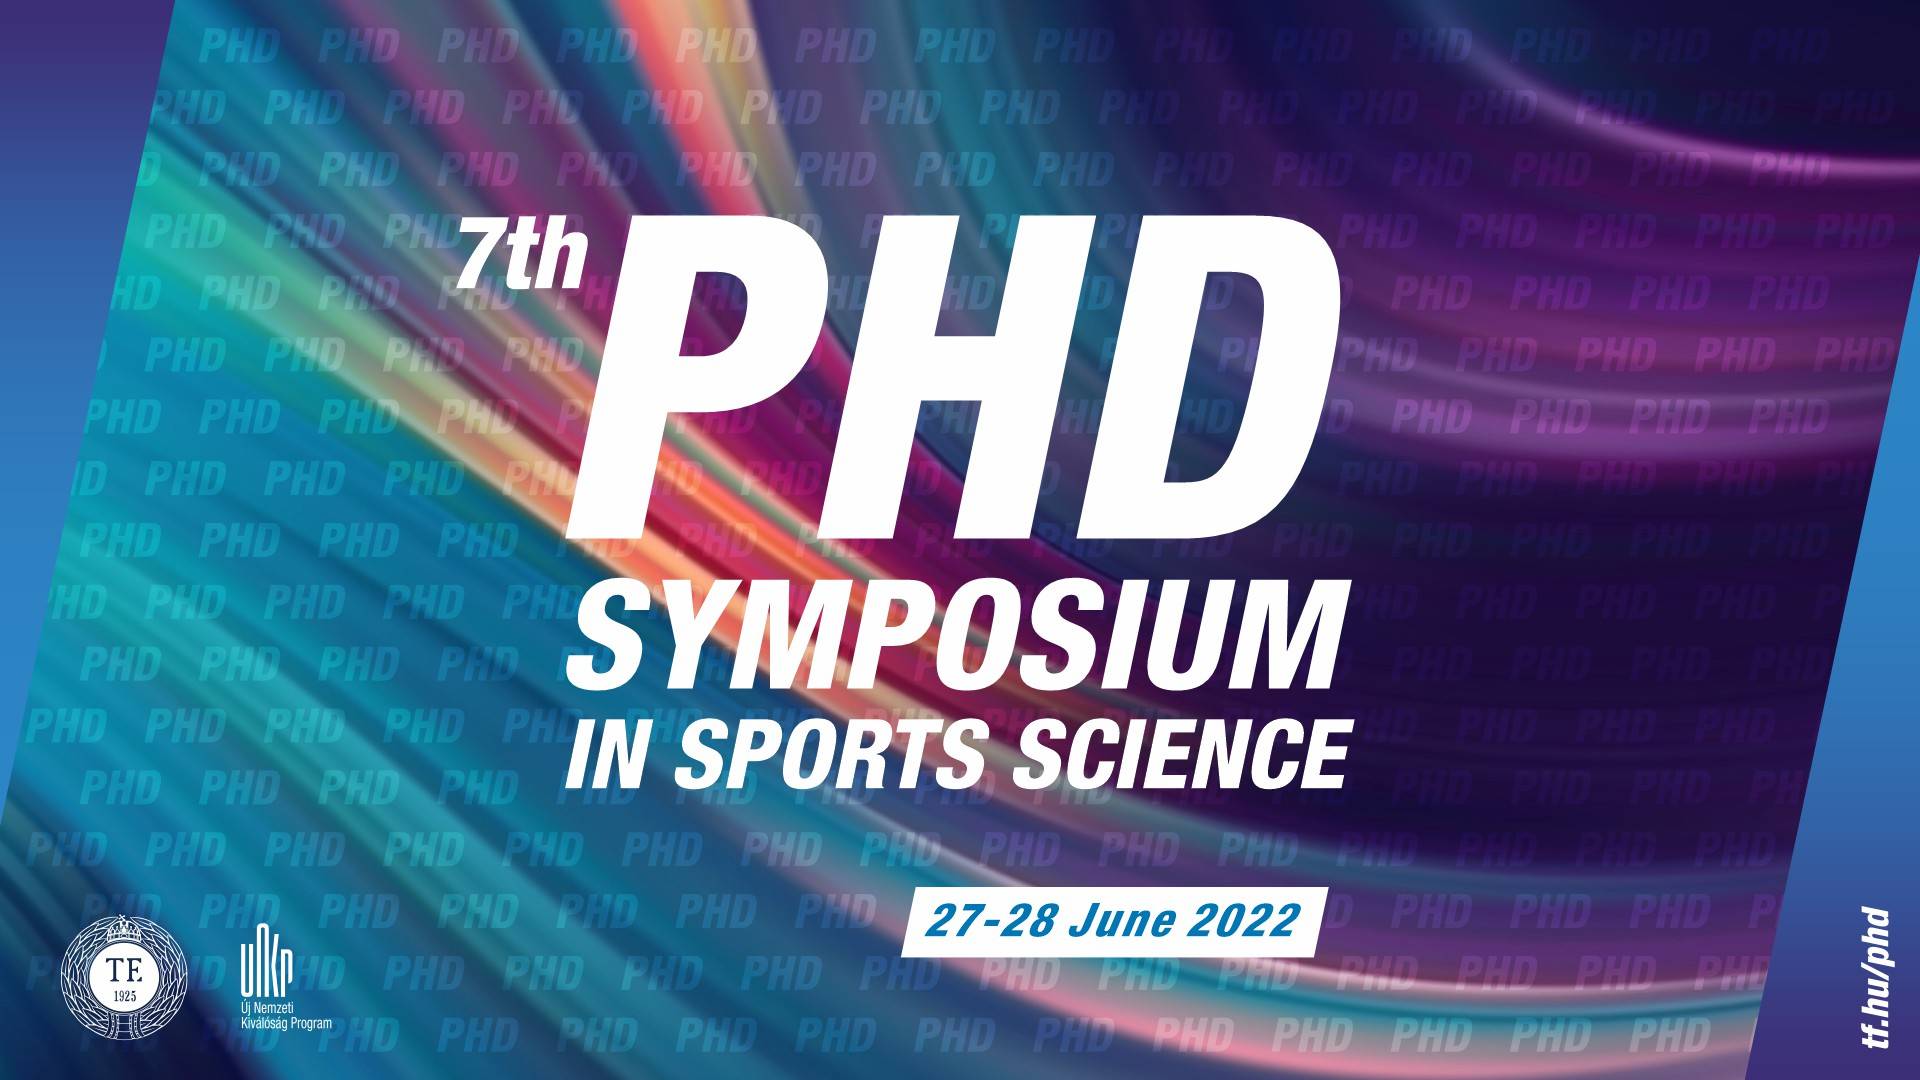 7th PhD Symposium in Sports Science